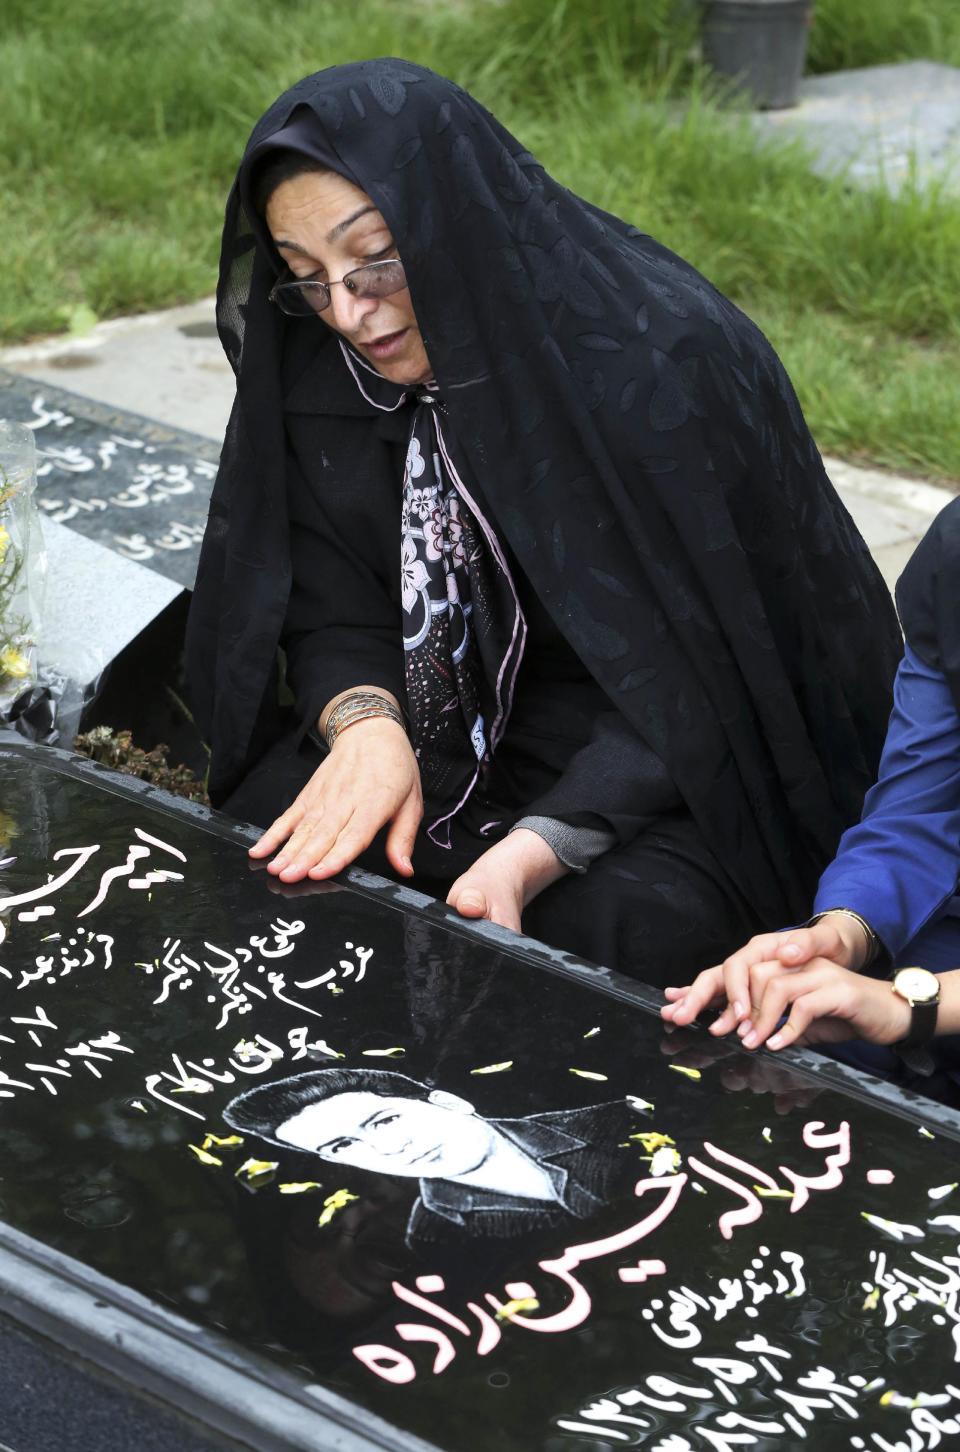 In this picture taken on Monday, April 28, 2014, Iranian woman Samereh Alinejad prays at the grave of her sons Amir Hossein and Abdollah in a cemetery in the city of Royan about 146 miles (235 kilometers) north of the capital Tehran, Iran. Amir Hossein was killed in a motorcycle crash and Abdollah was killed in a street brawl. Alinejad tells The Associated Press that she had felt she could never live with herself if the man who killed her son Abdollah were spared from execution. But in the last moment, she pardoned him in an act that has made her a hero in her hometown, where banners in the streets praise her family’s mercy. (AP Photo/Vahid Salemi)